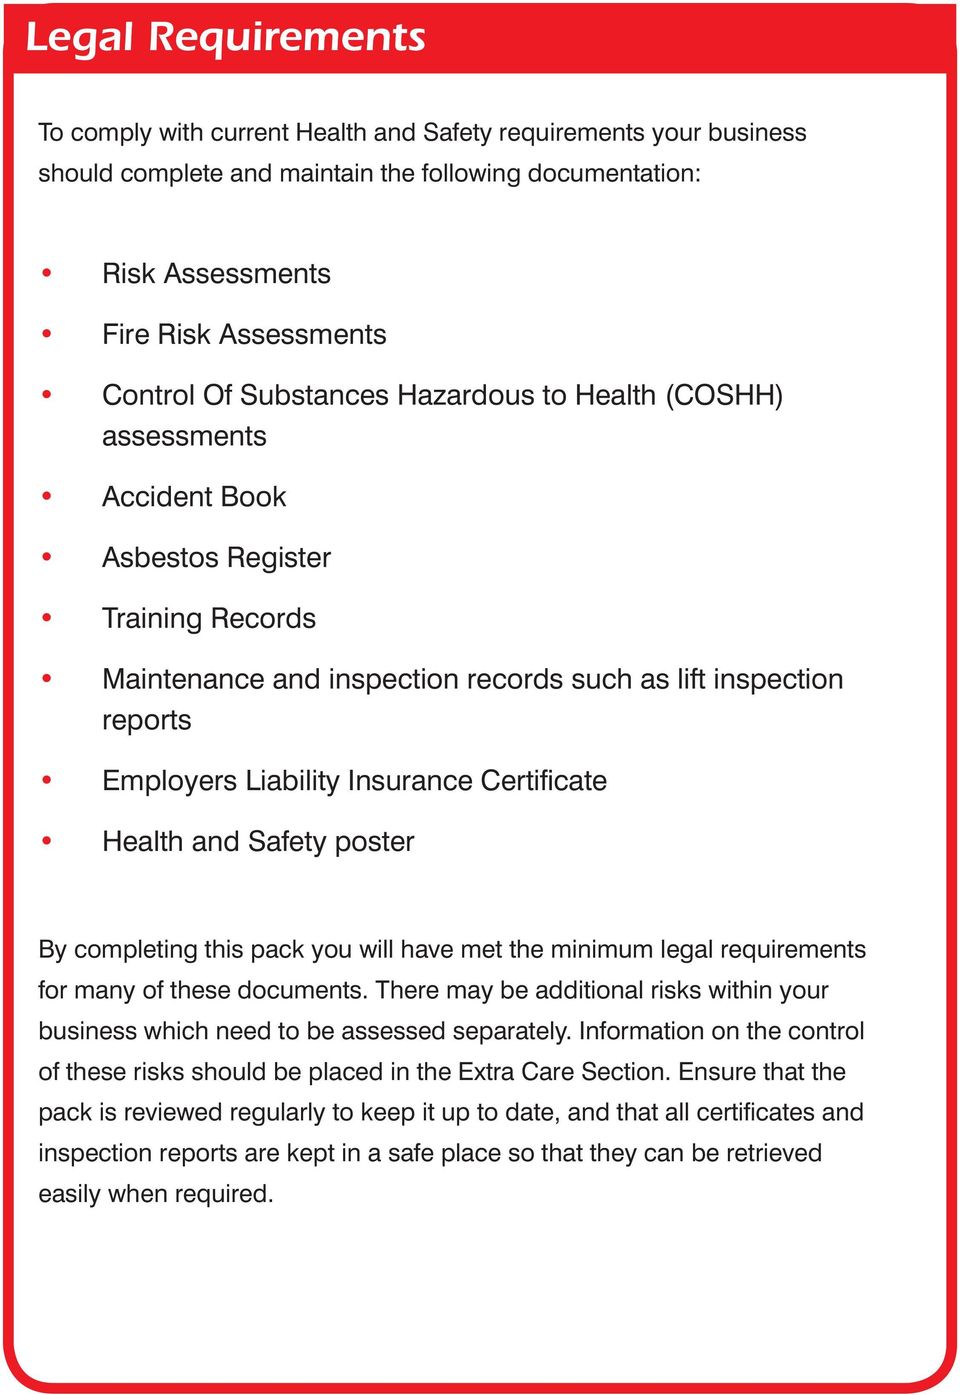 Certificate Health and Safety poster By completing this pack you will have met the minimum legal requirements for many of these documents.